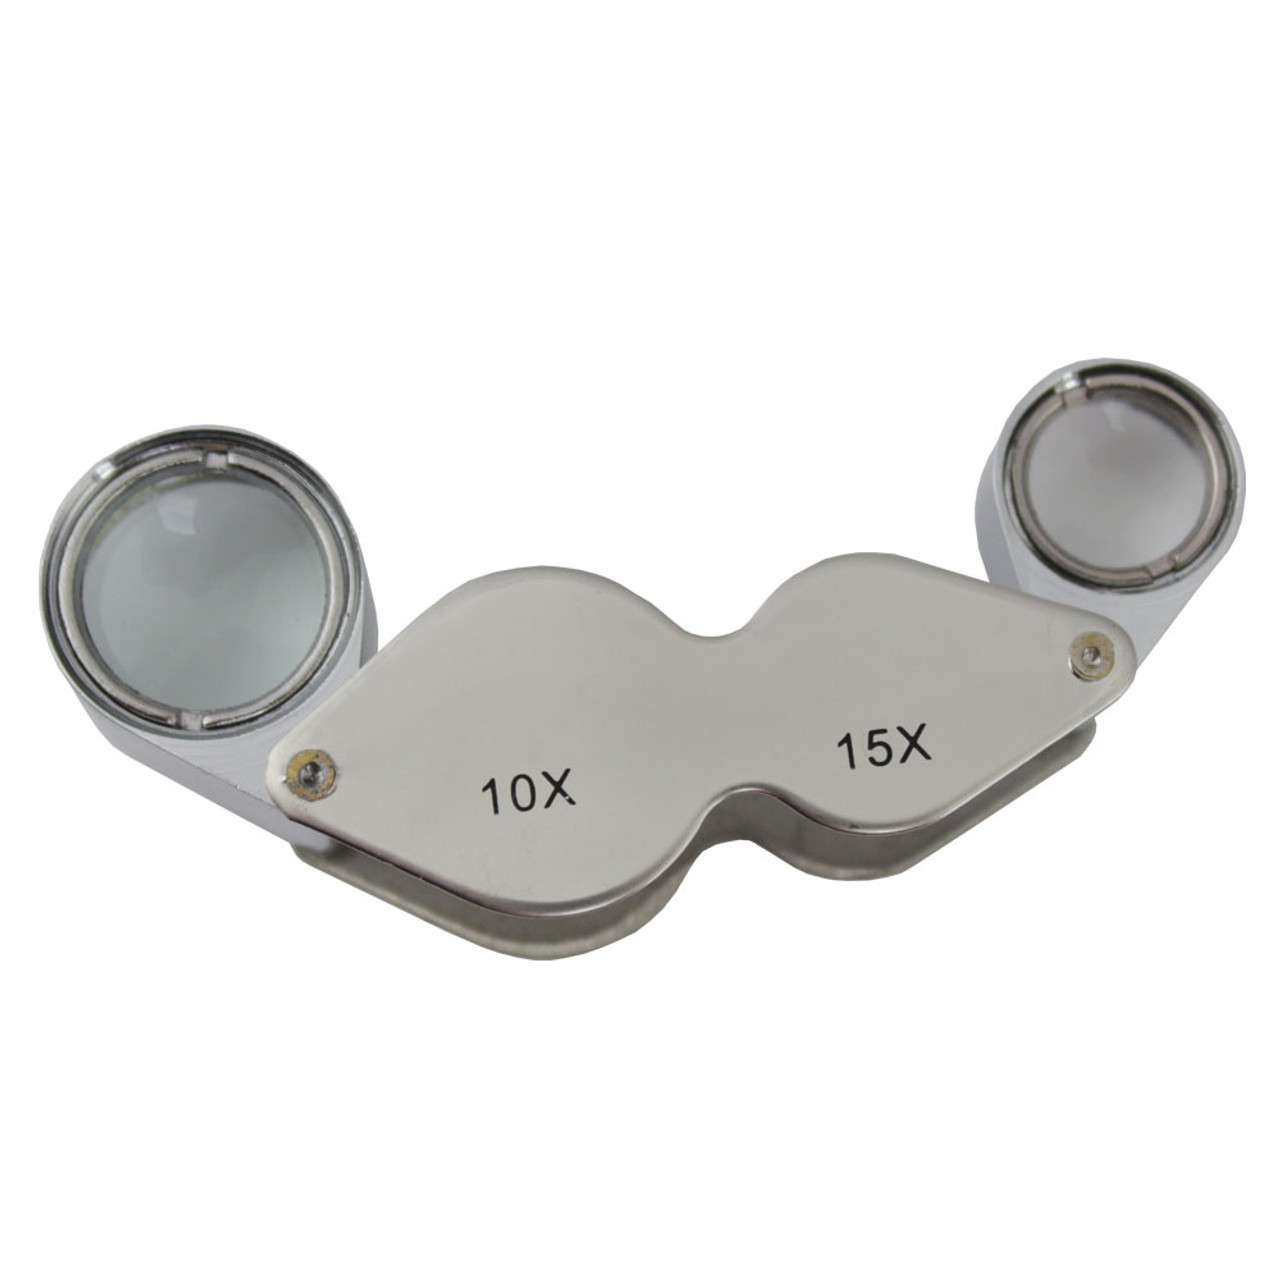 15X Jewelry Loupe Jewelers Triplet 21mm Silver Loupe with Case